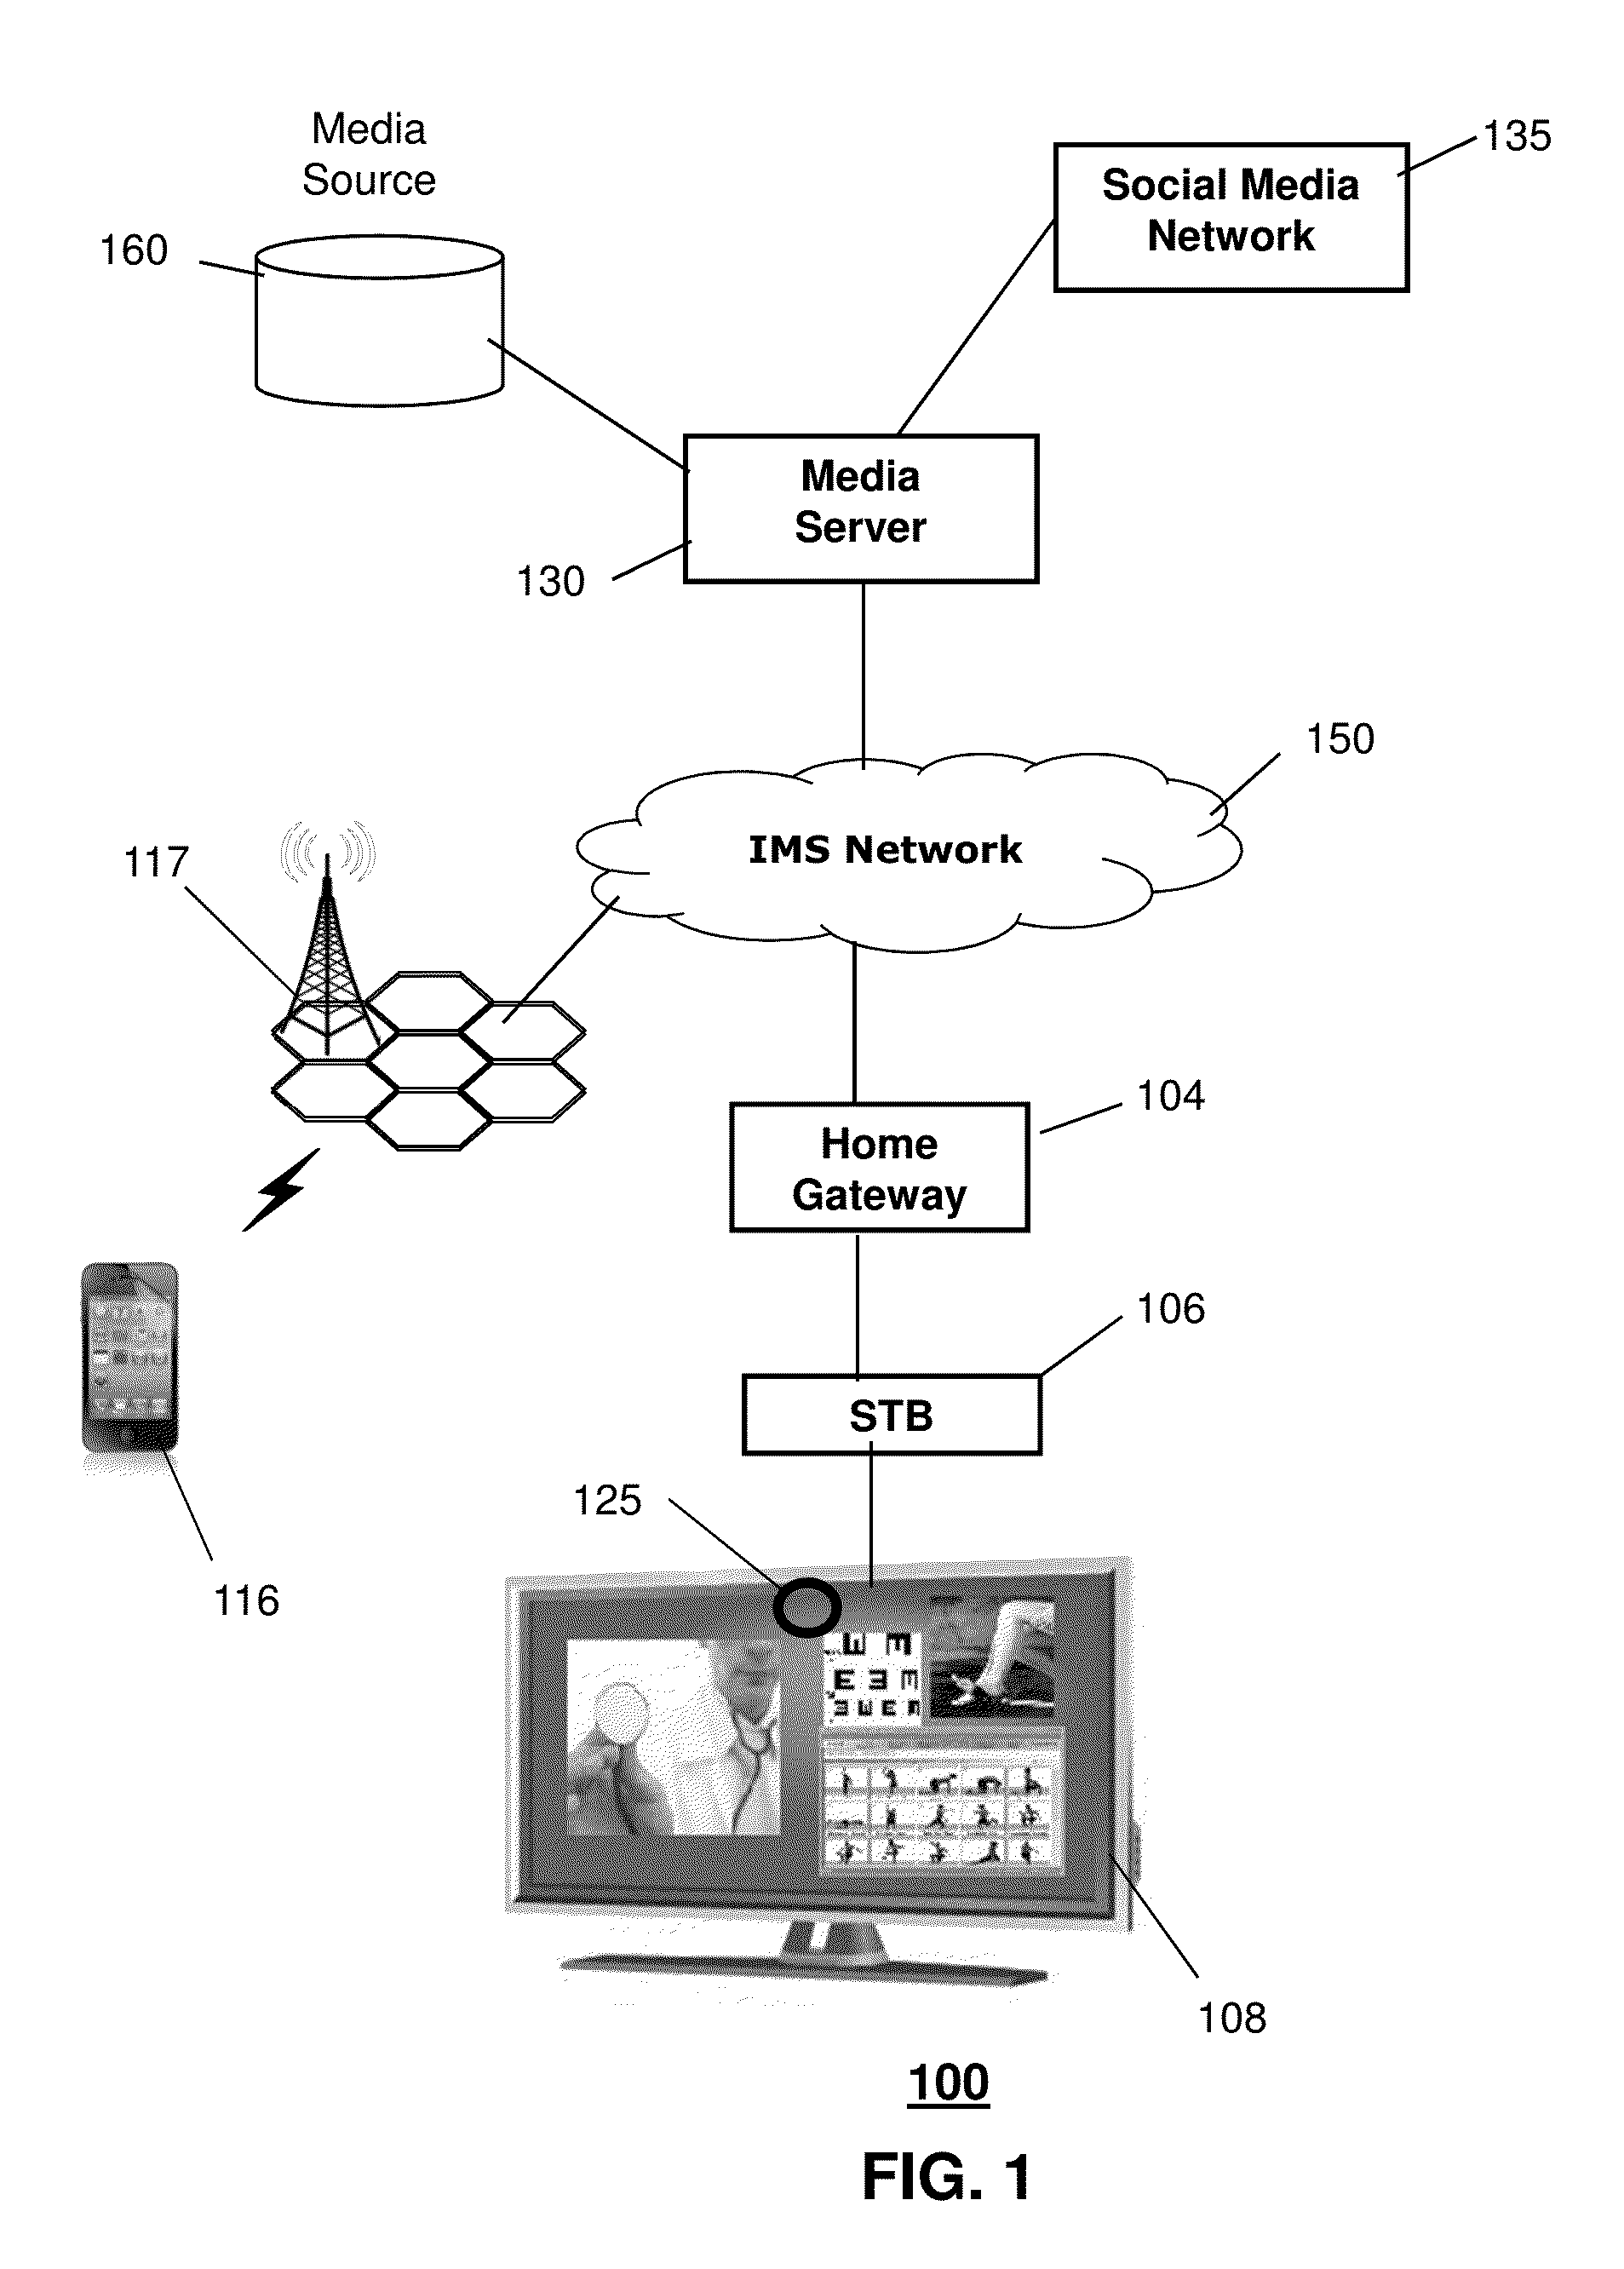 Method and apparatus for providing media content